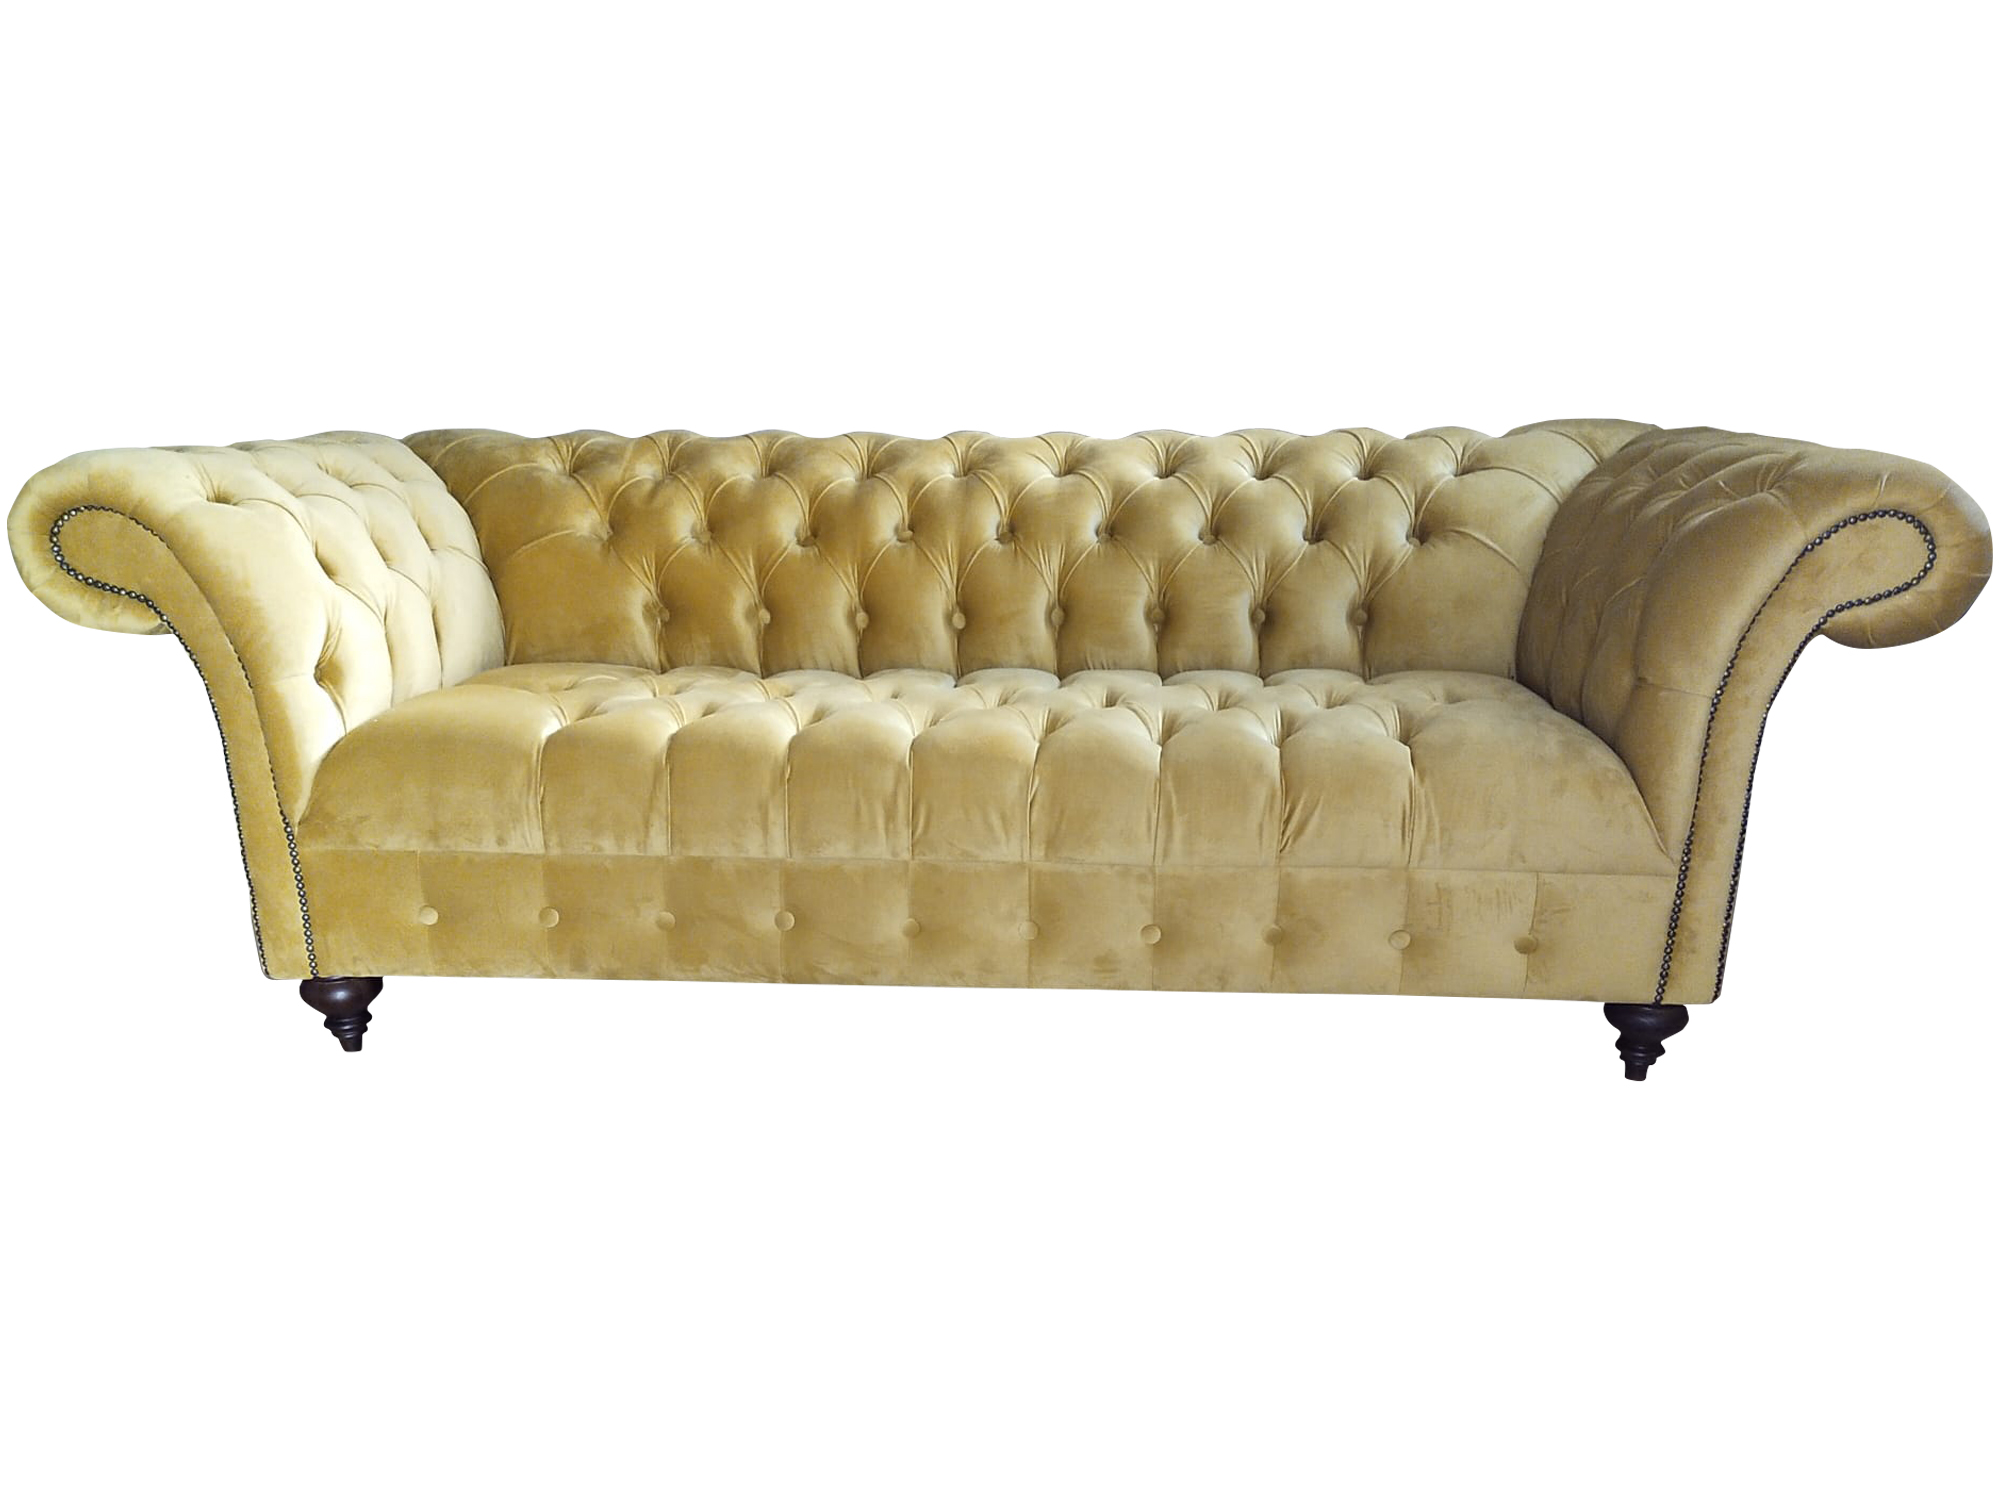 Luxury Sofa Three Seater Design Chesterfield Textile Couches Modern